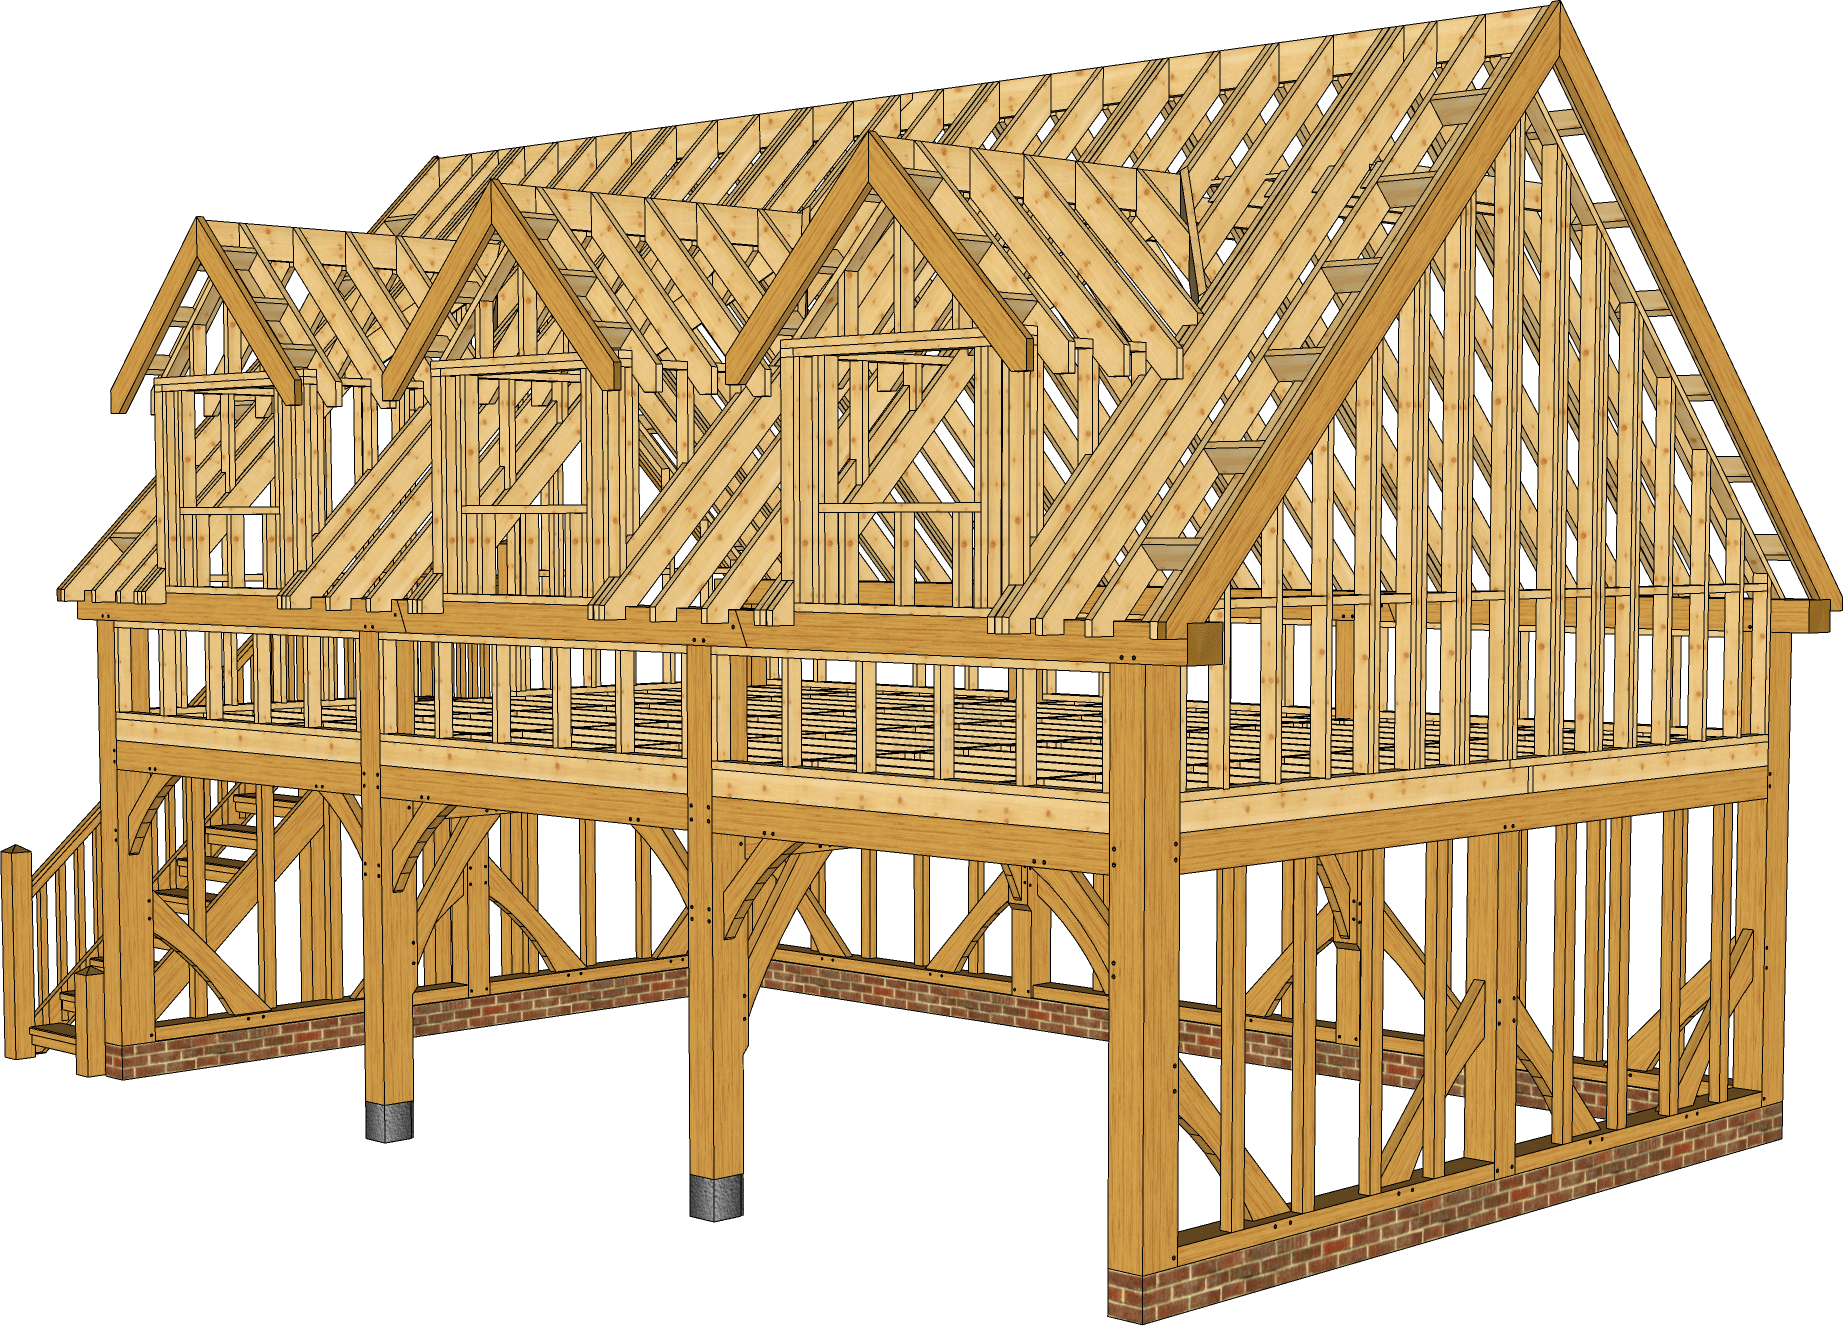 Gable End & Lofted Room Above